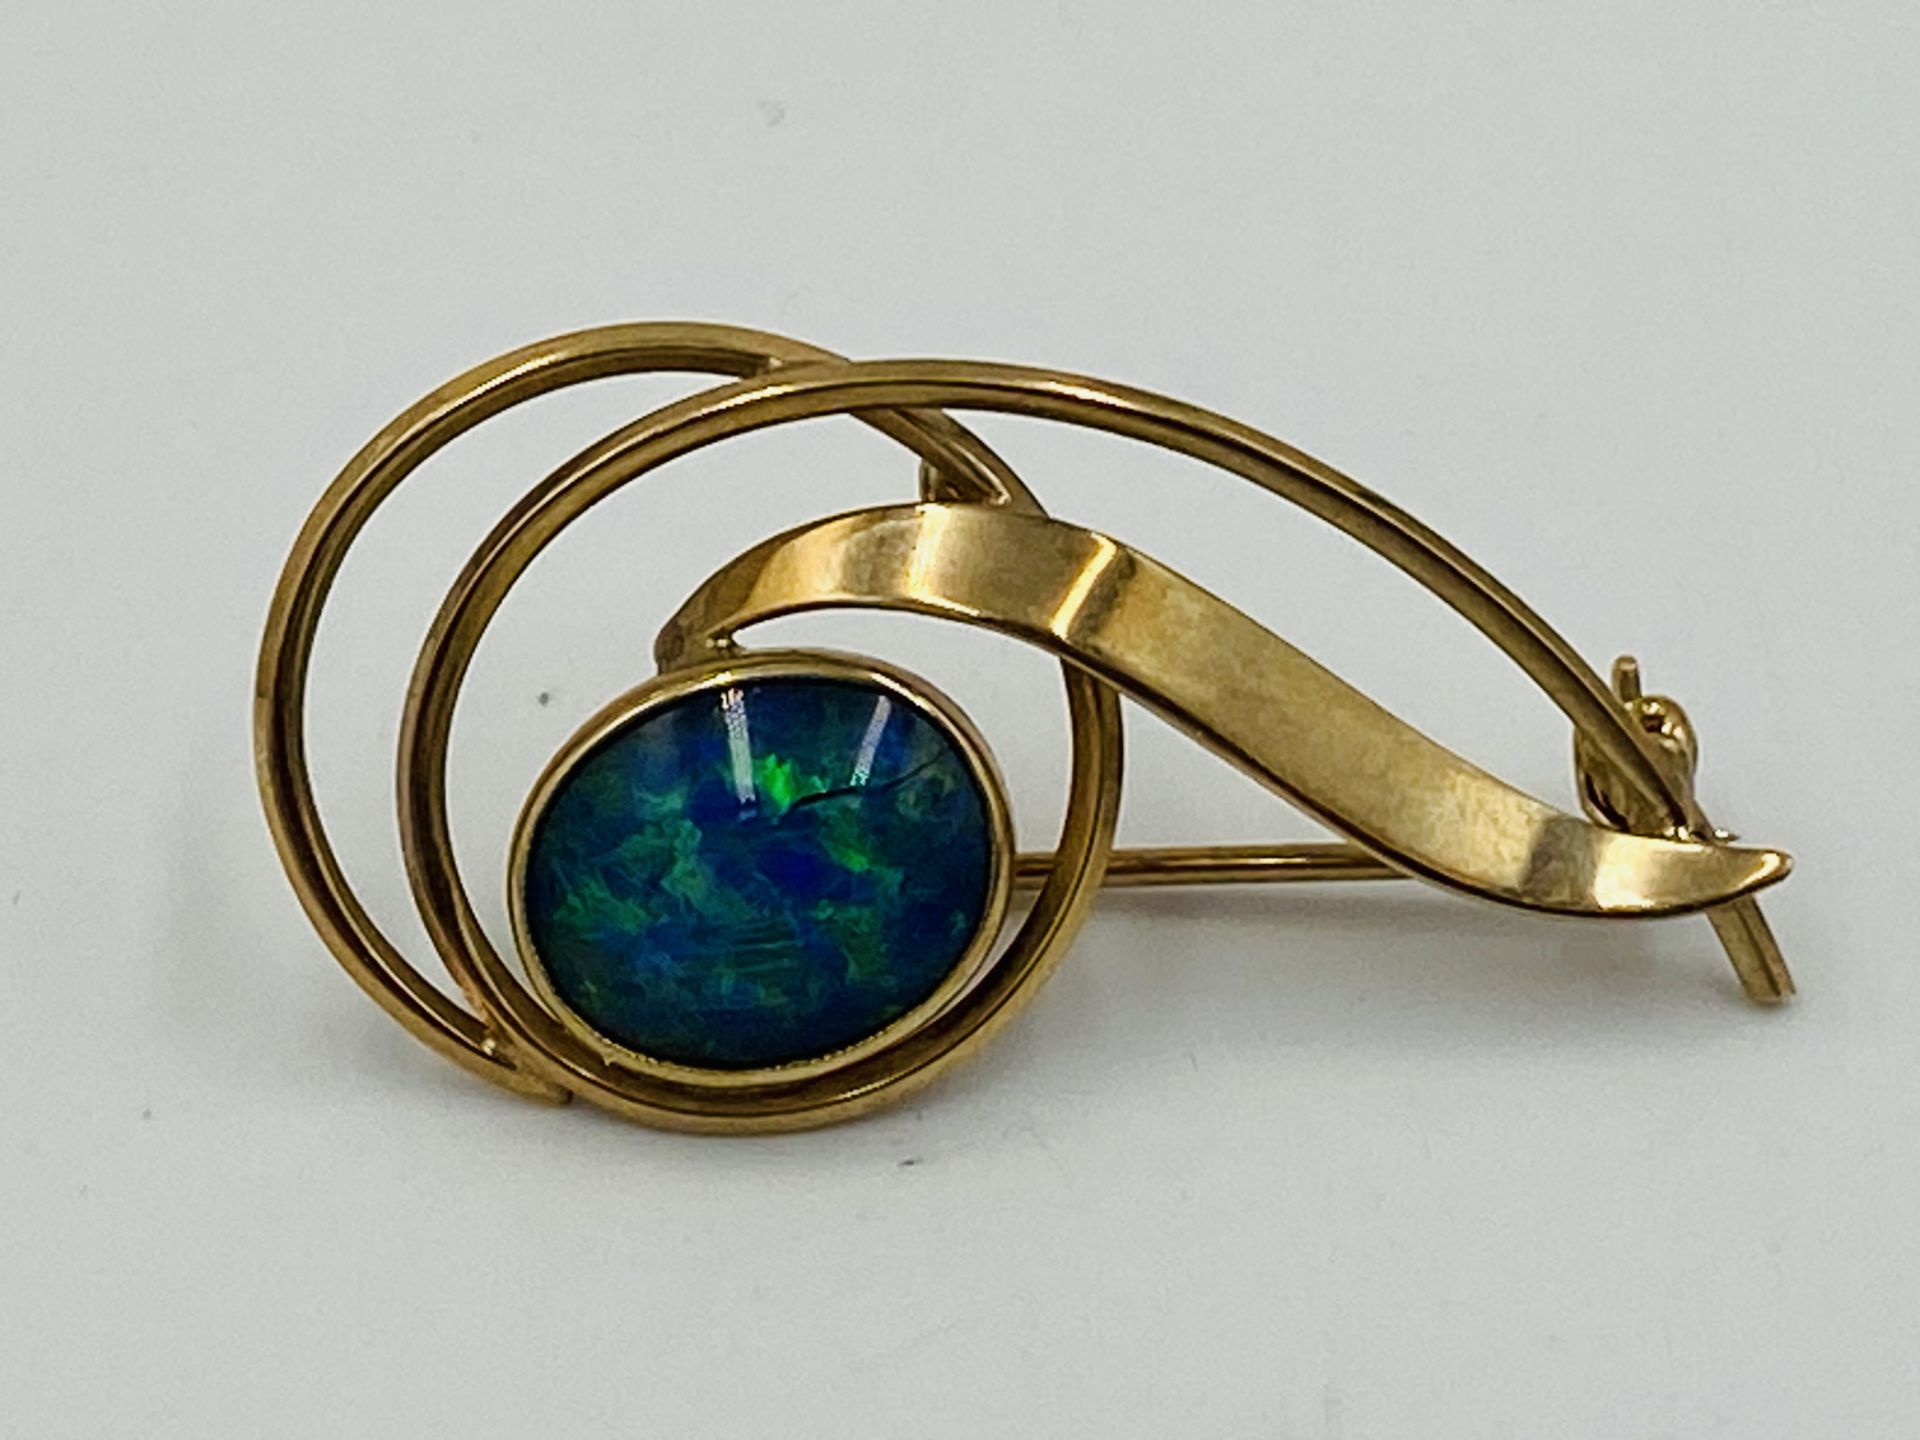 9ct gold brooch set with an opal - Image 2 of 5